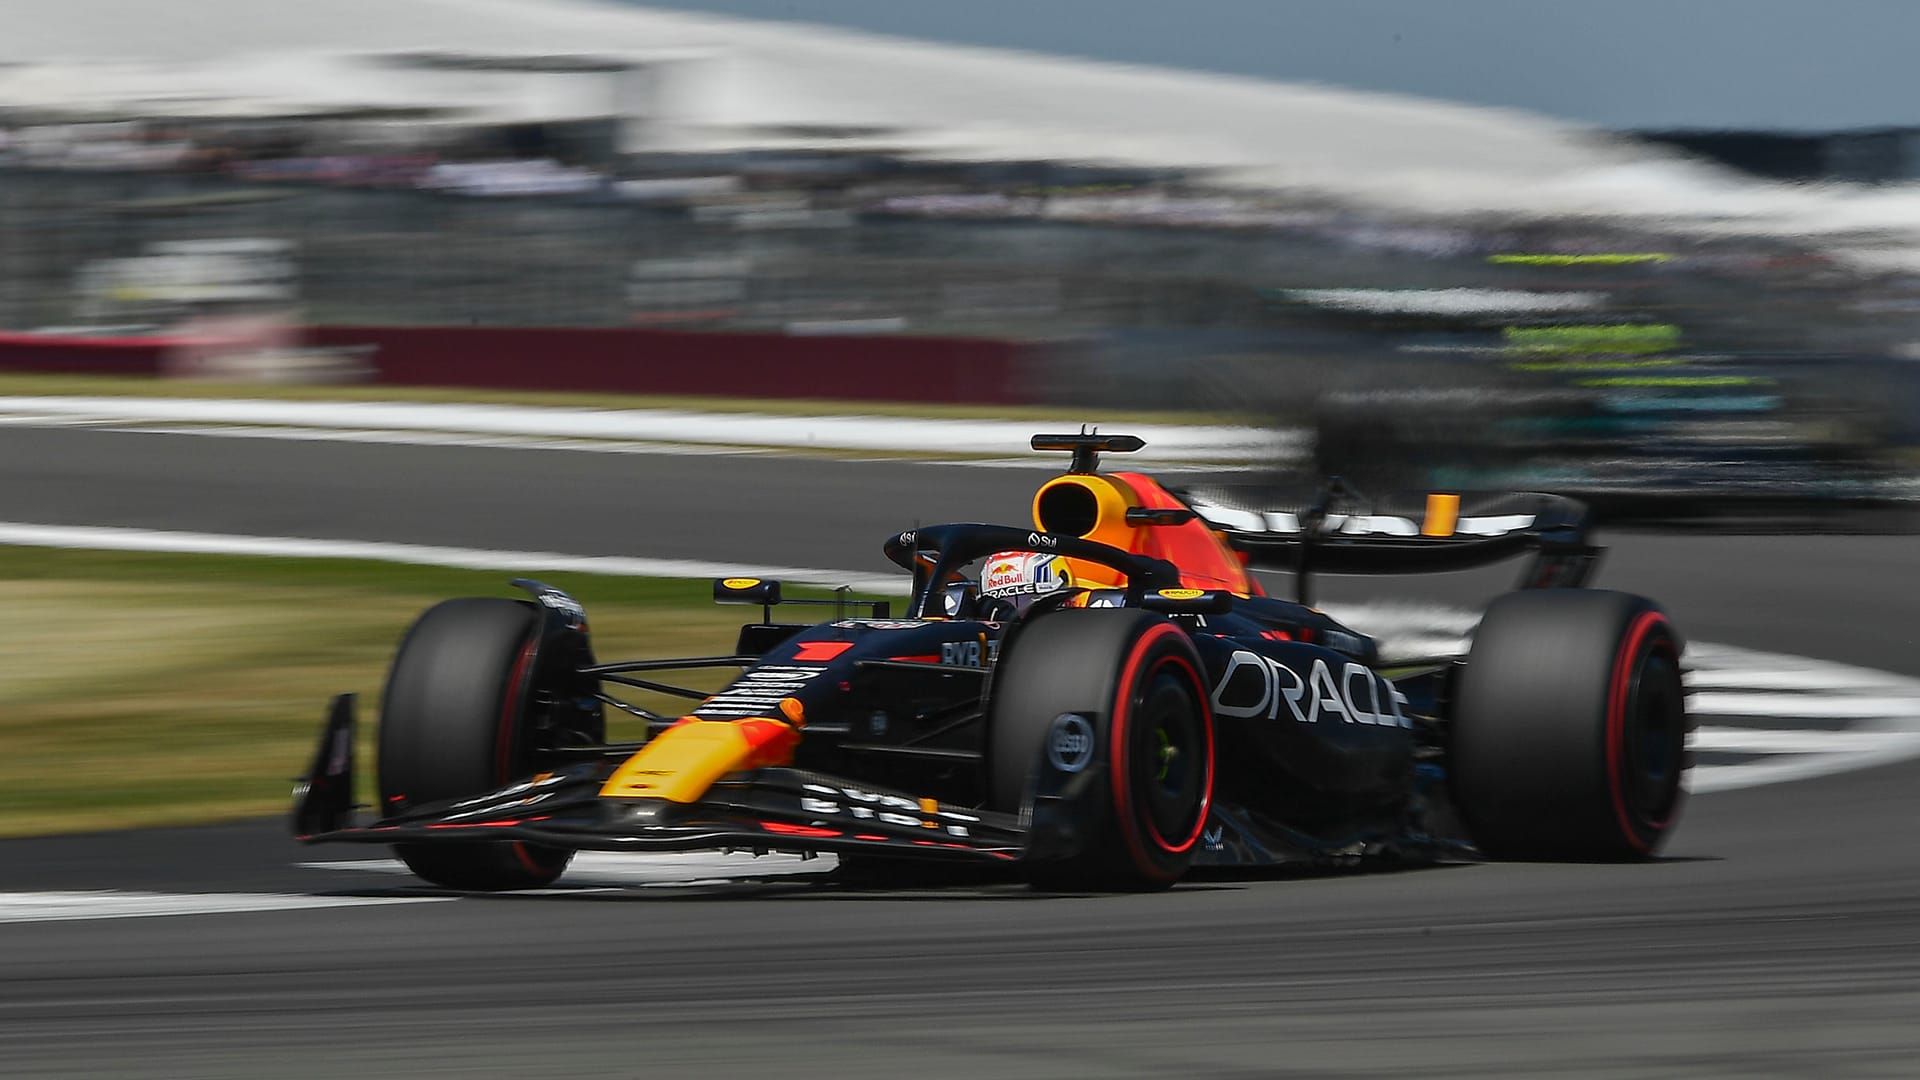 2023 British Grand Prix FP2 report and highlights Verstappen tops second practice at Silverstone from Sainz and Albon as Leclerc hits trouble Formula 1®